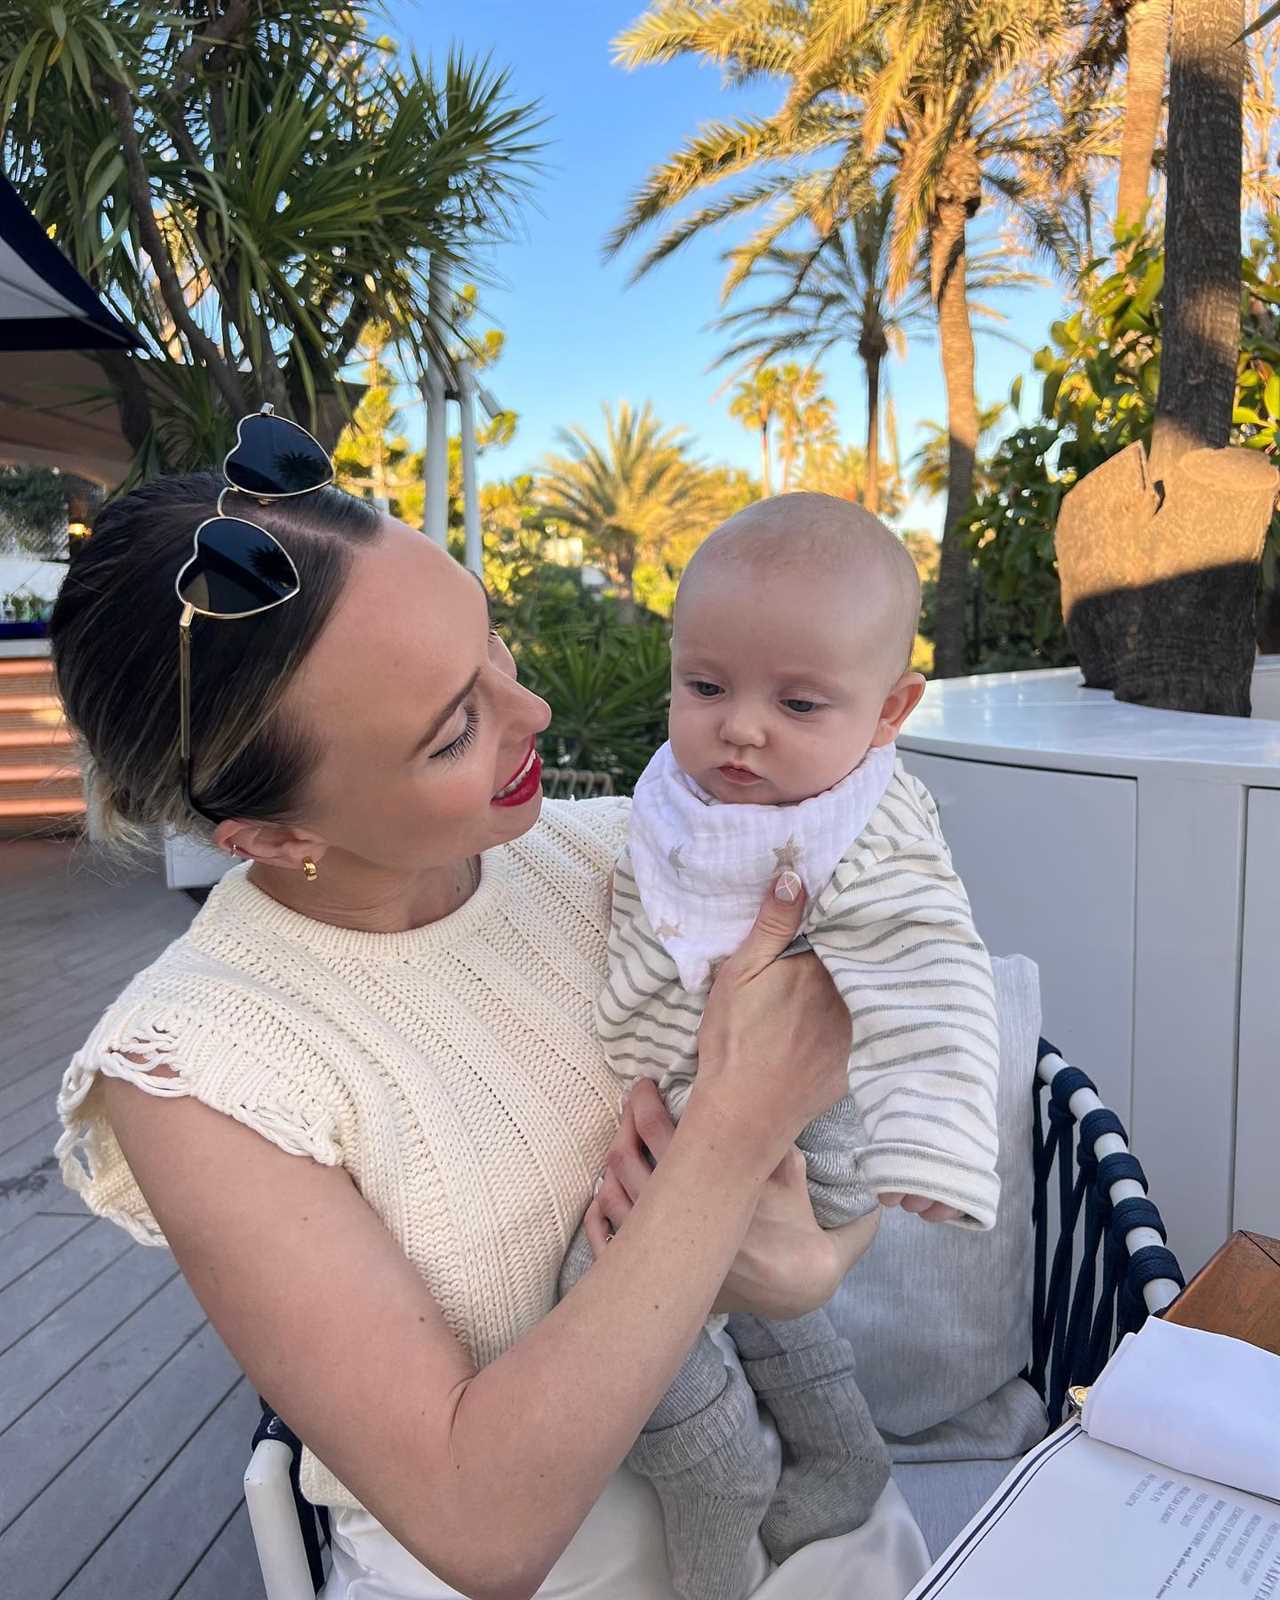 Jorgie Porter shows off natural beauty as she cuddles baby son on the beach on holiday